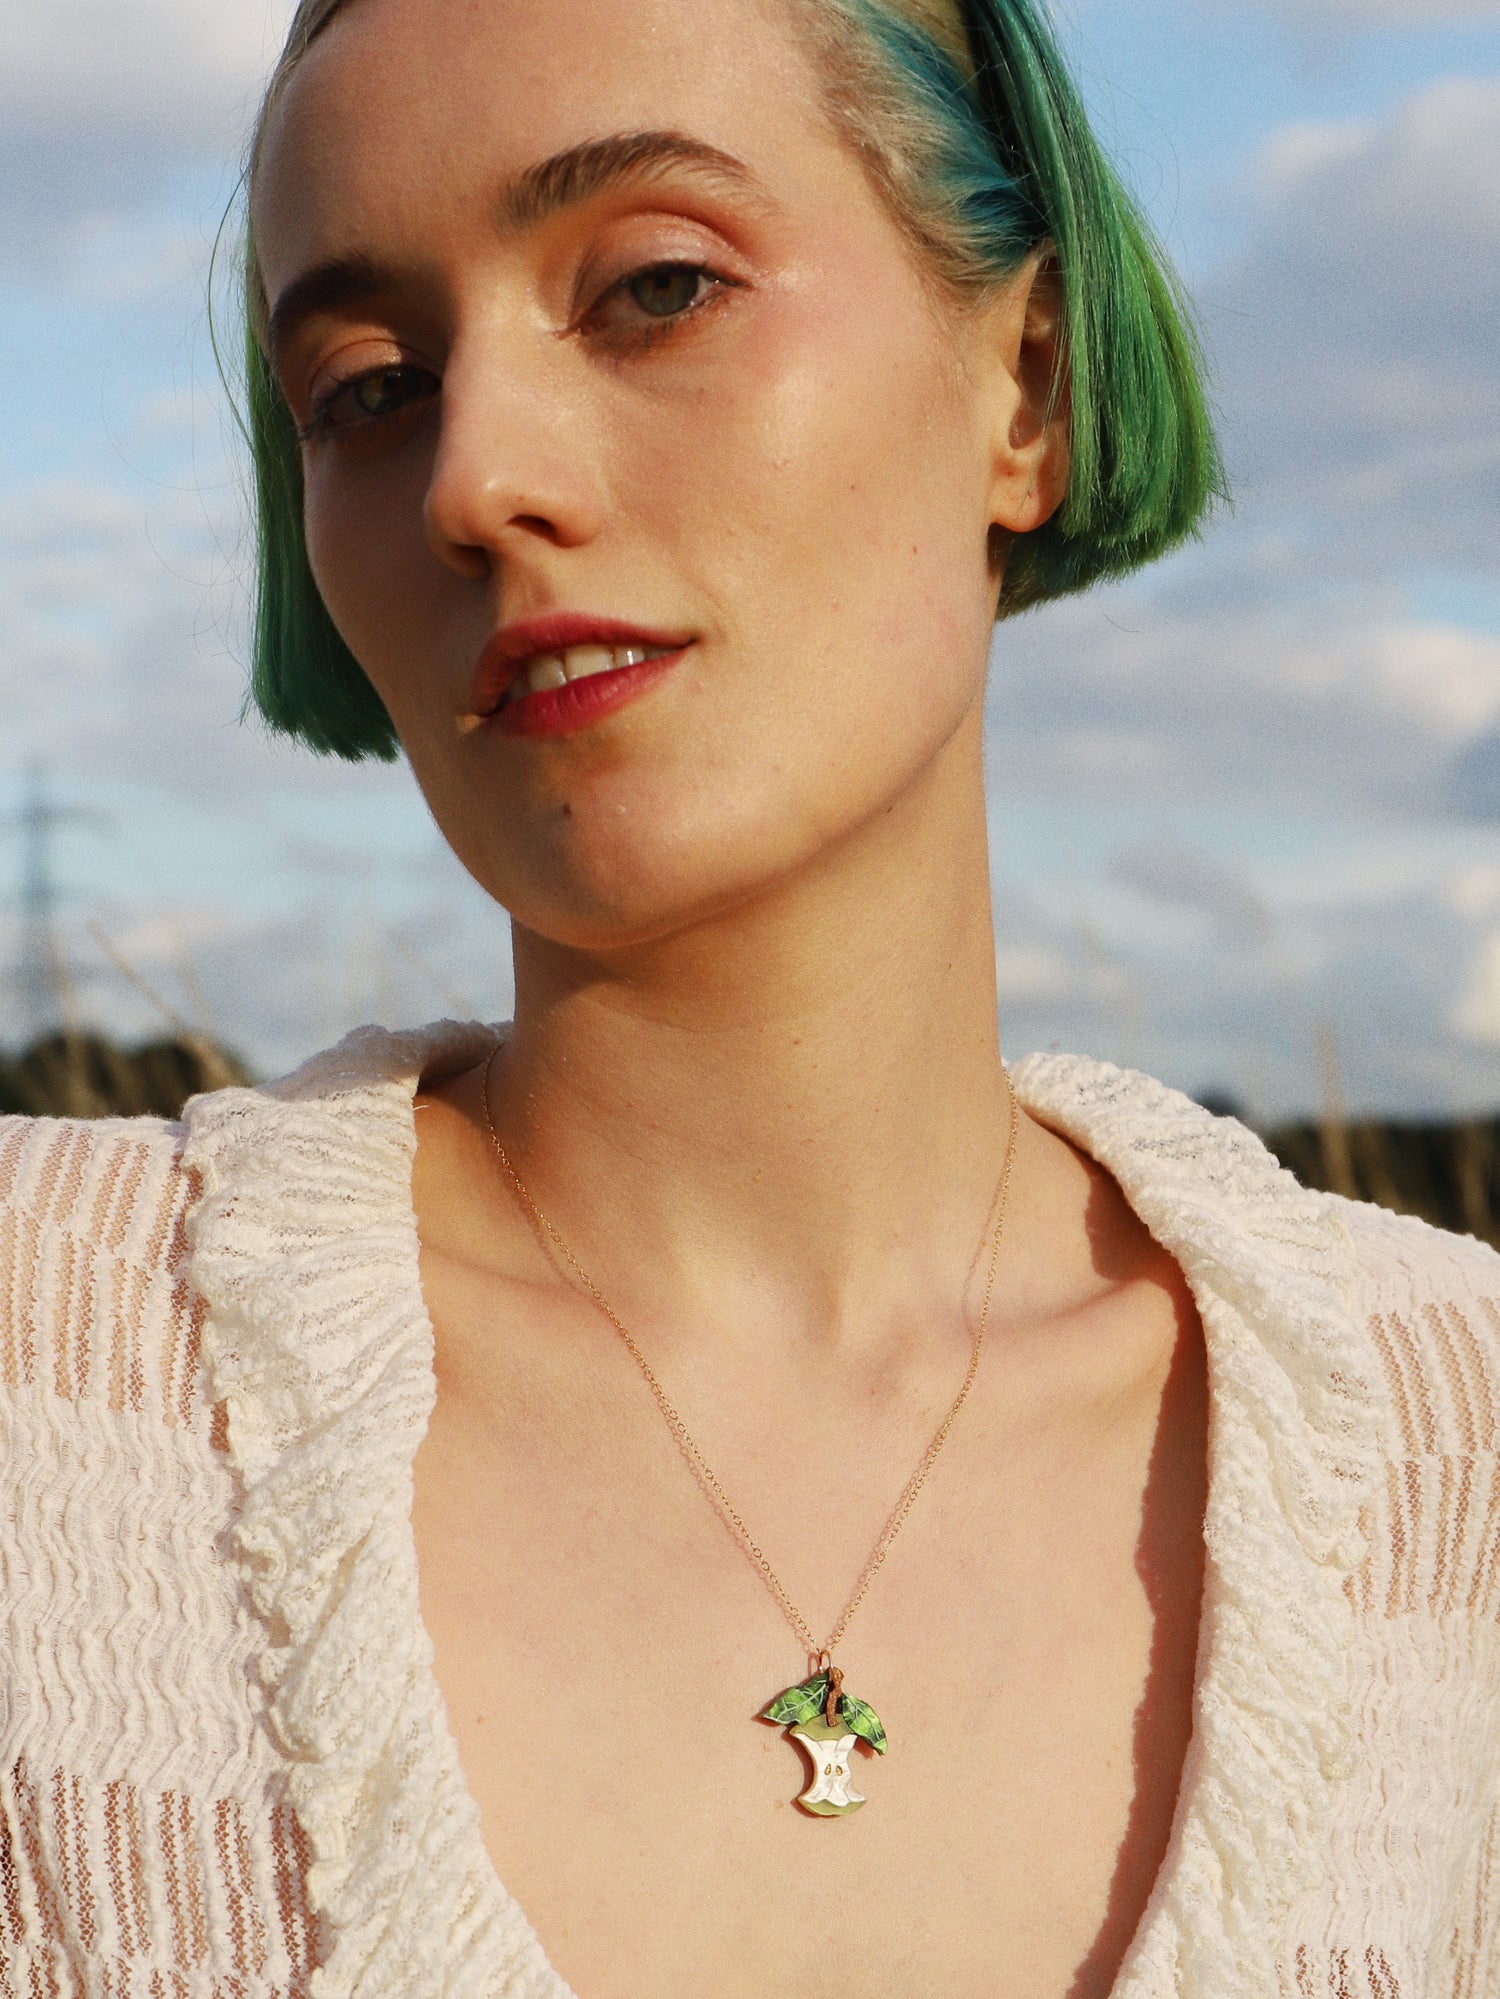 Apple Necklace in Green